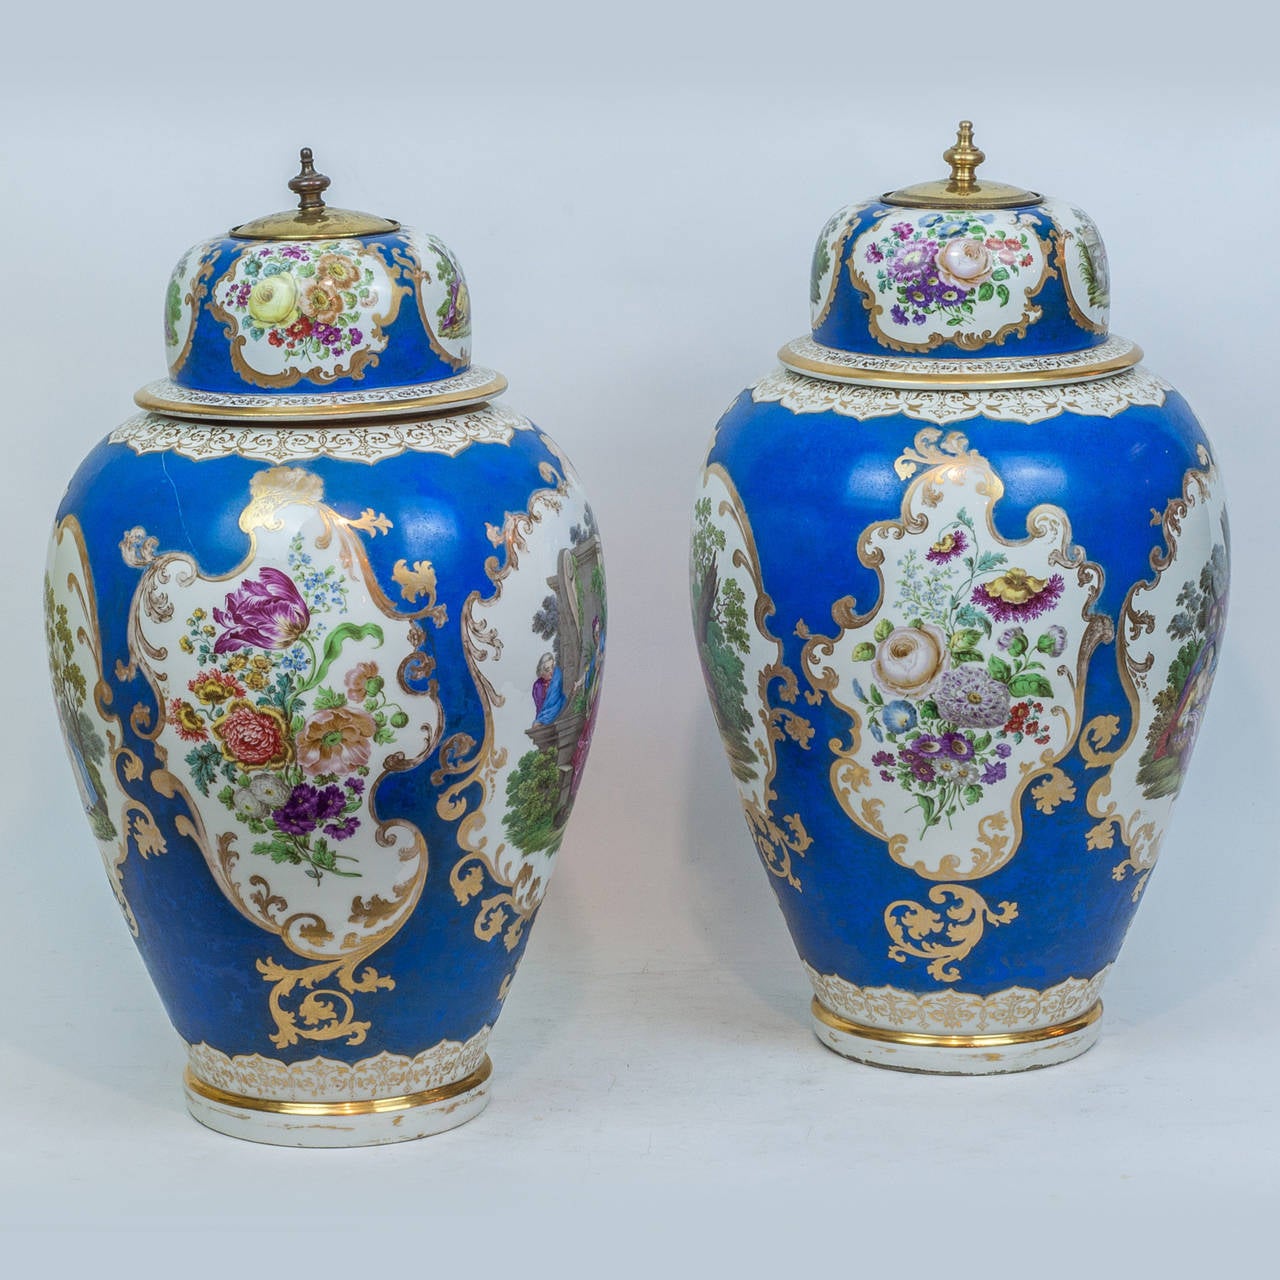 Pair of Meissen Style Blue Porcelain Covered Jars with Painted Scenes.
Stock Number: PP21